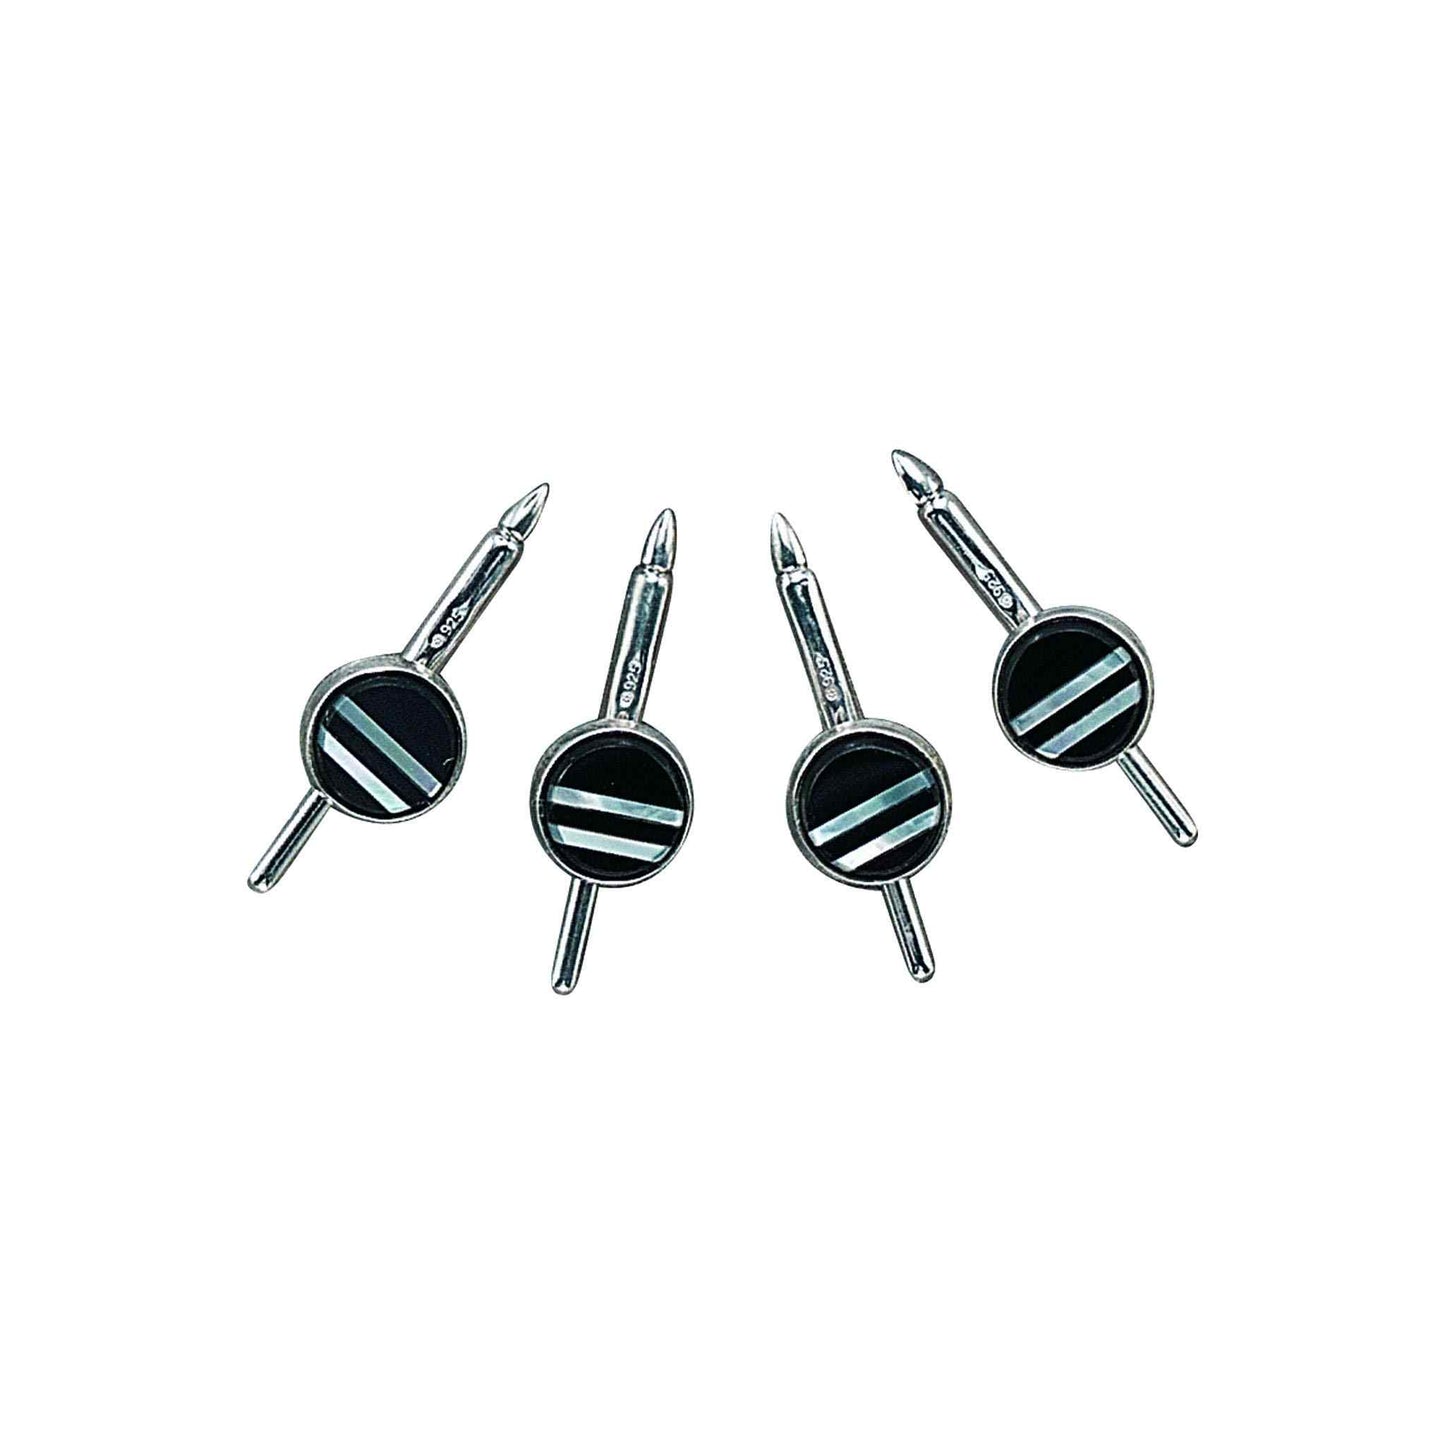 A four piece sterling silver stud set with onyx & mother of pearl stripes displayed on a neutral white background.